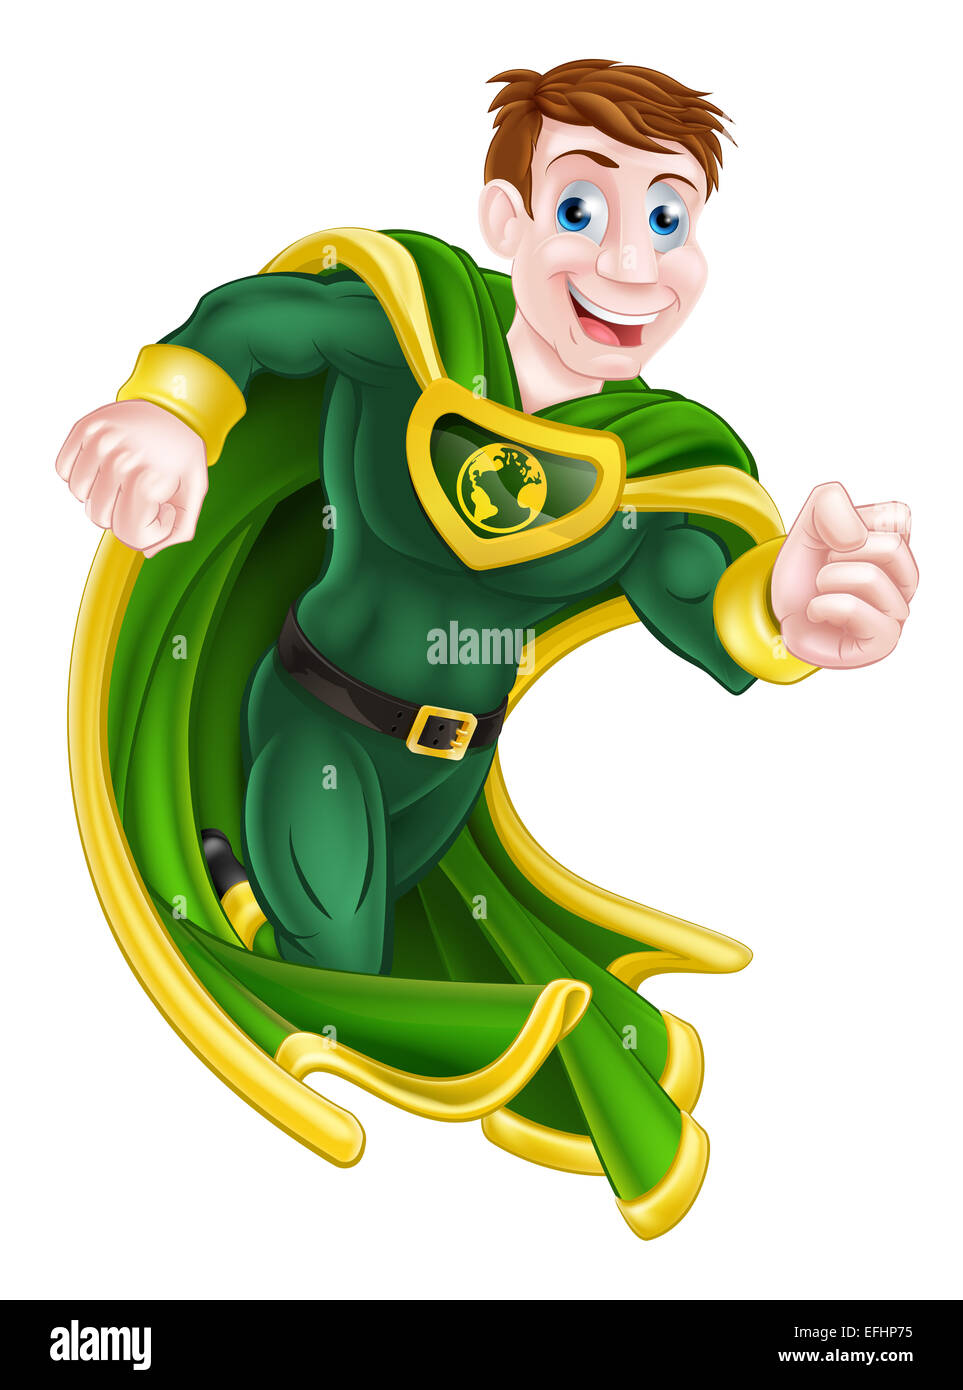 A cartoon superhero character running with a green cape and costume and an earth globe symbol on his chest Stock Photo